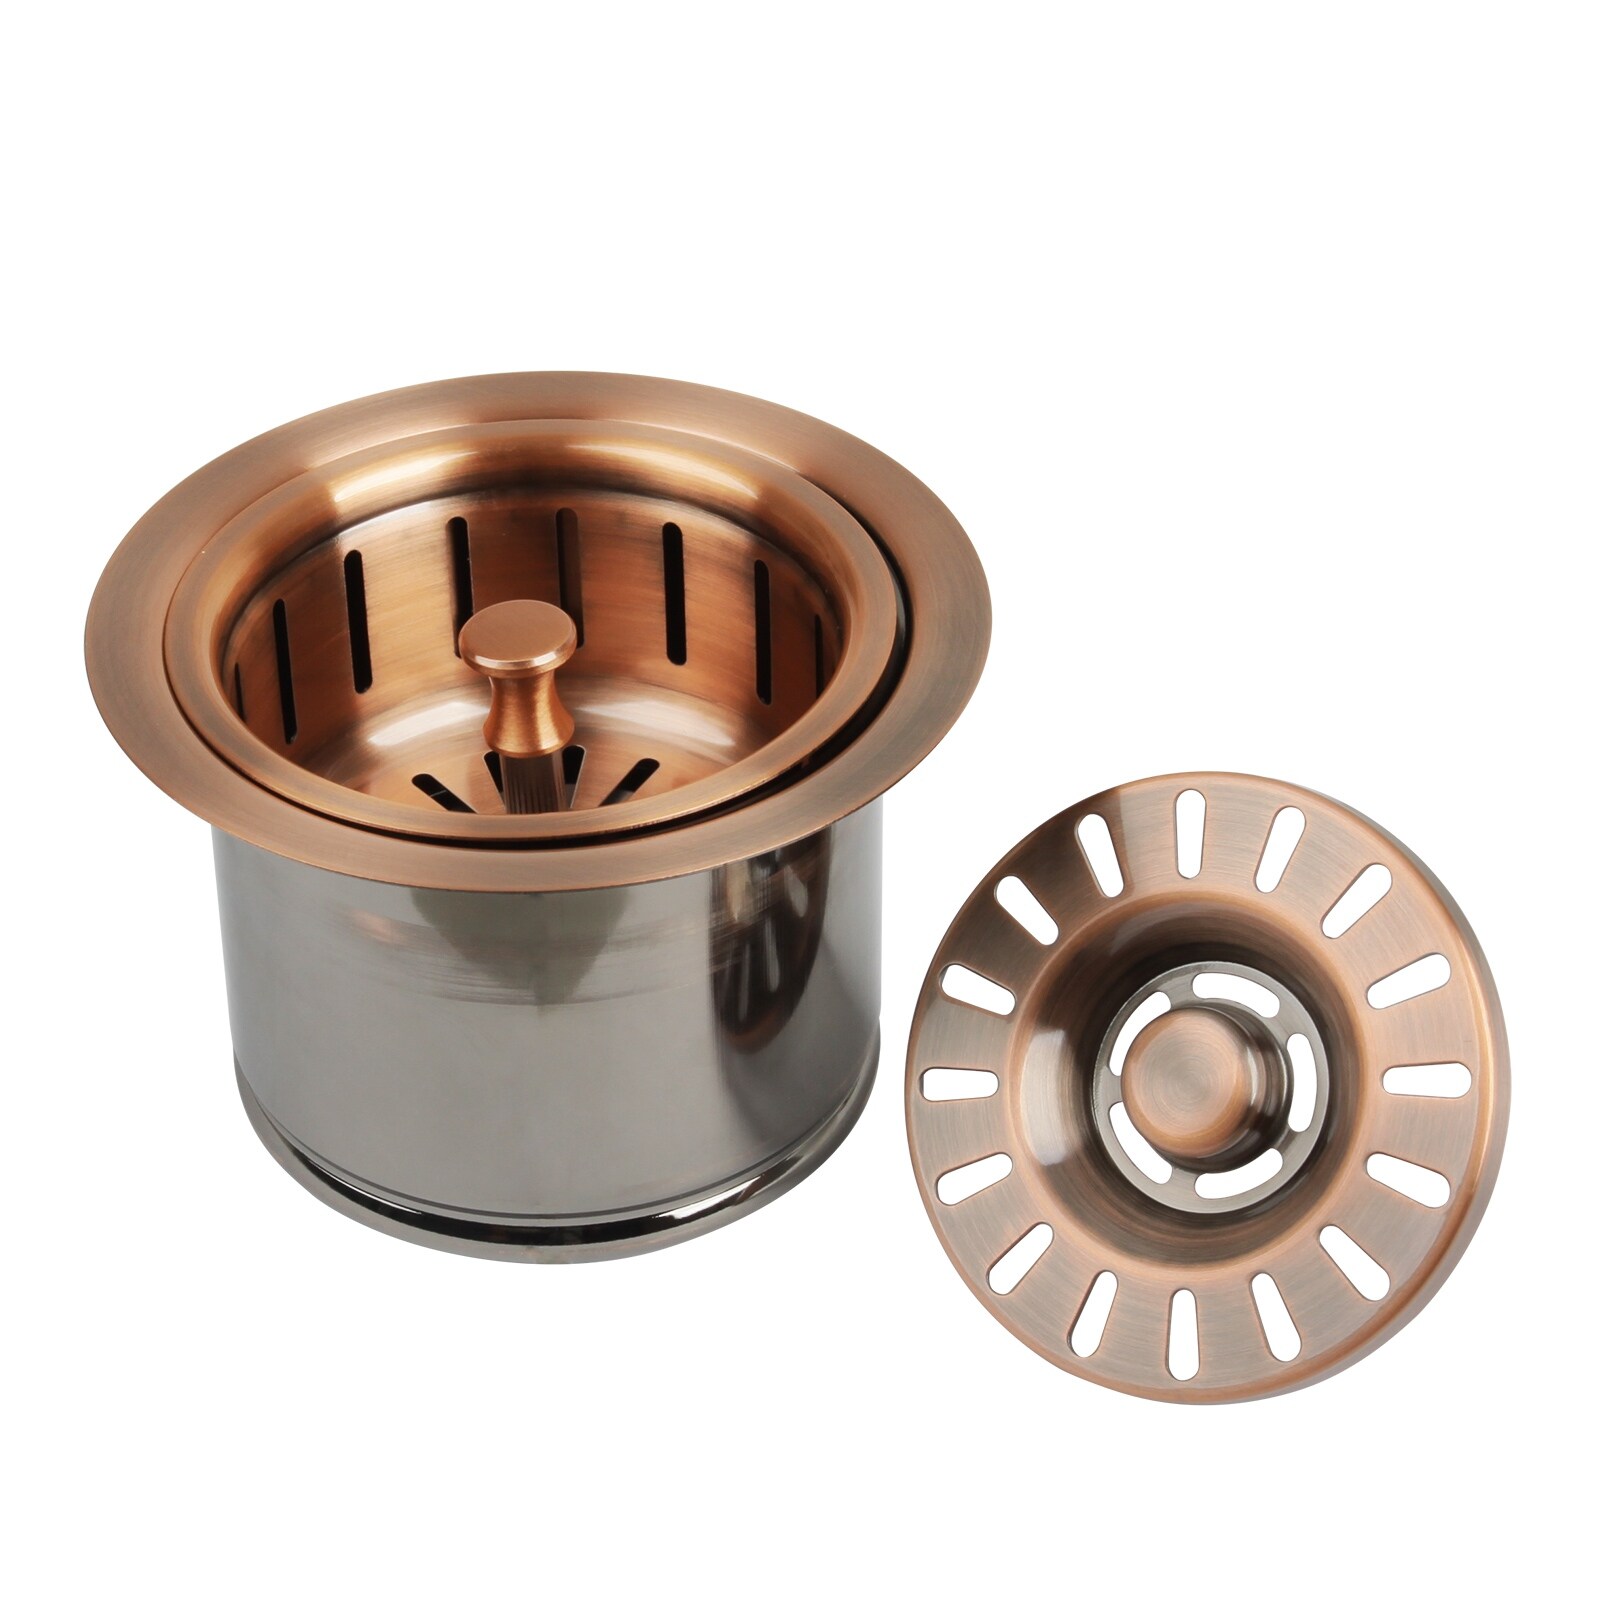 https://ak1.ostkcdn.com/images/products/is/images/direct/f8e7b54a6910d09f198daa7abb37fcc653ba8431/Copper-Kitchen-Sink-Garbage-Disposal-Flange-Stopper-%282.85%22-Height%29.jpg